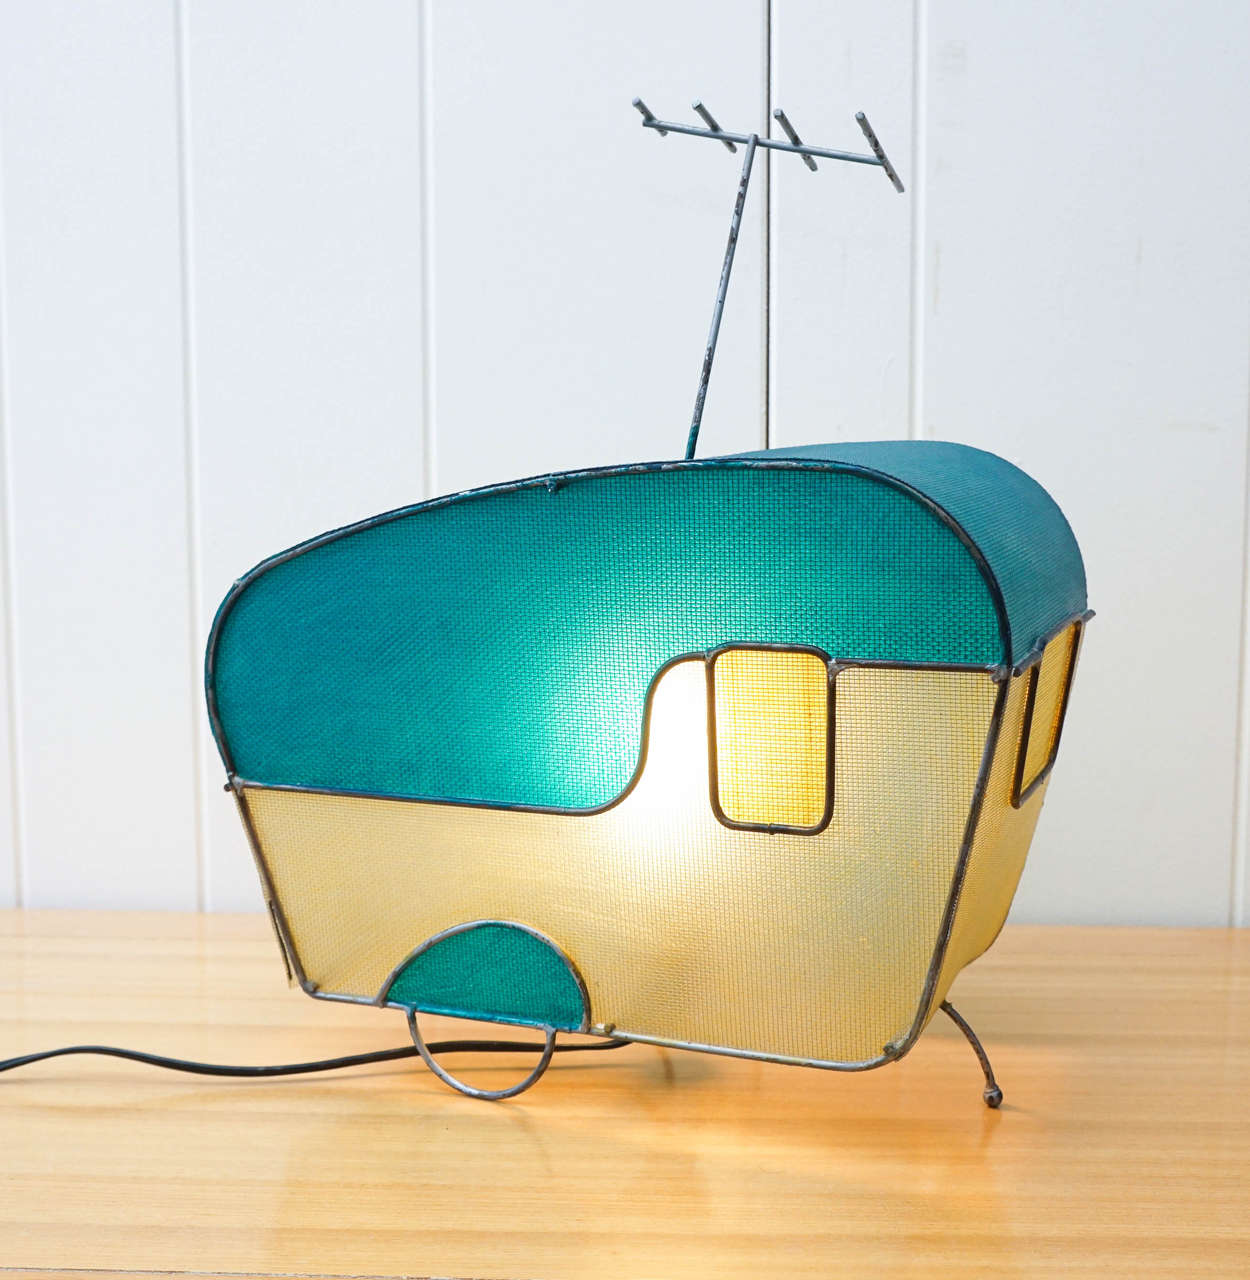 A Two-Toned Trailer Desk Lamp by artist Daniel Sadler (1957-2004)  This lamp is made from a unique medium, consisting of a wire mesh and plastic composite material, formed onto a welded wire framework, which was then hand-painted.